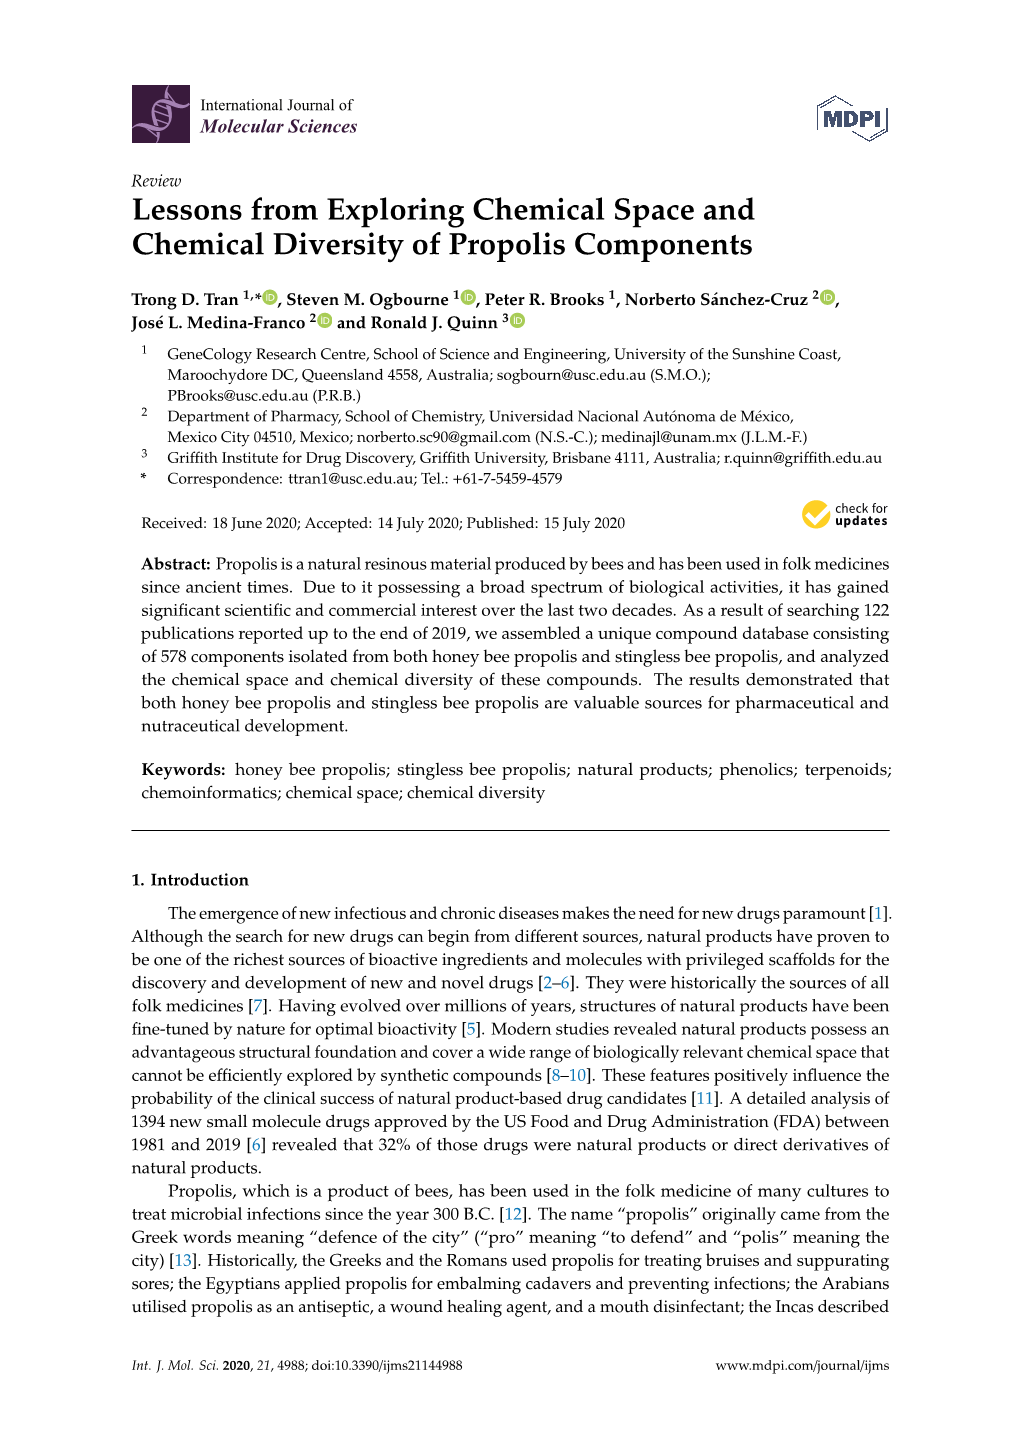 Lessons from Exploring Chemical Space and Chemical Diversity of Propolis Components